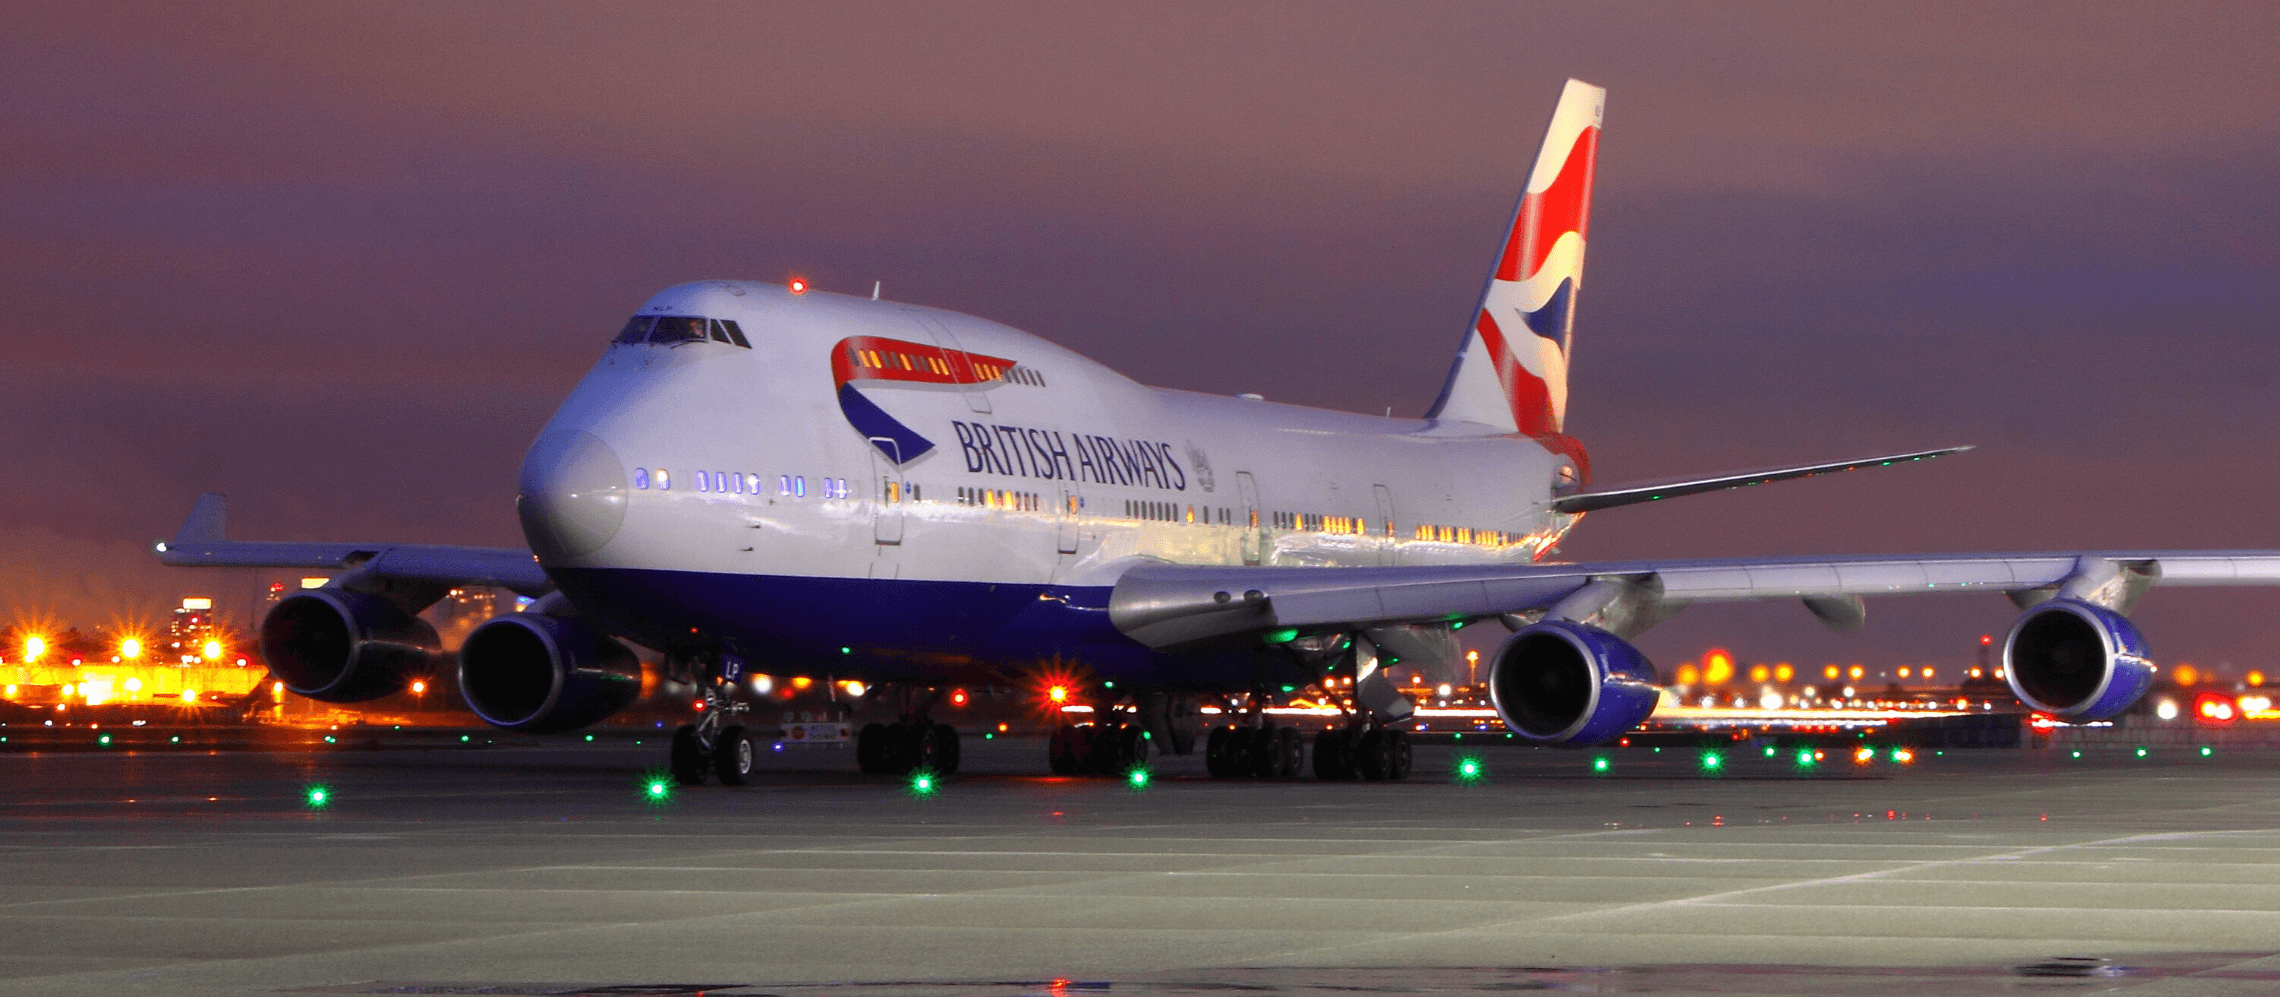 Photo for: A Chat With Wine & Beverage Manager at British Airways